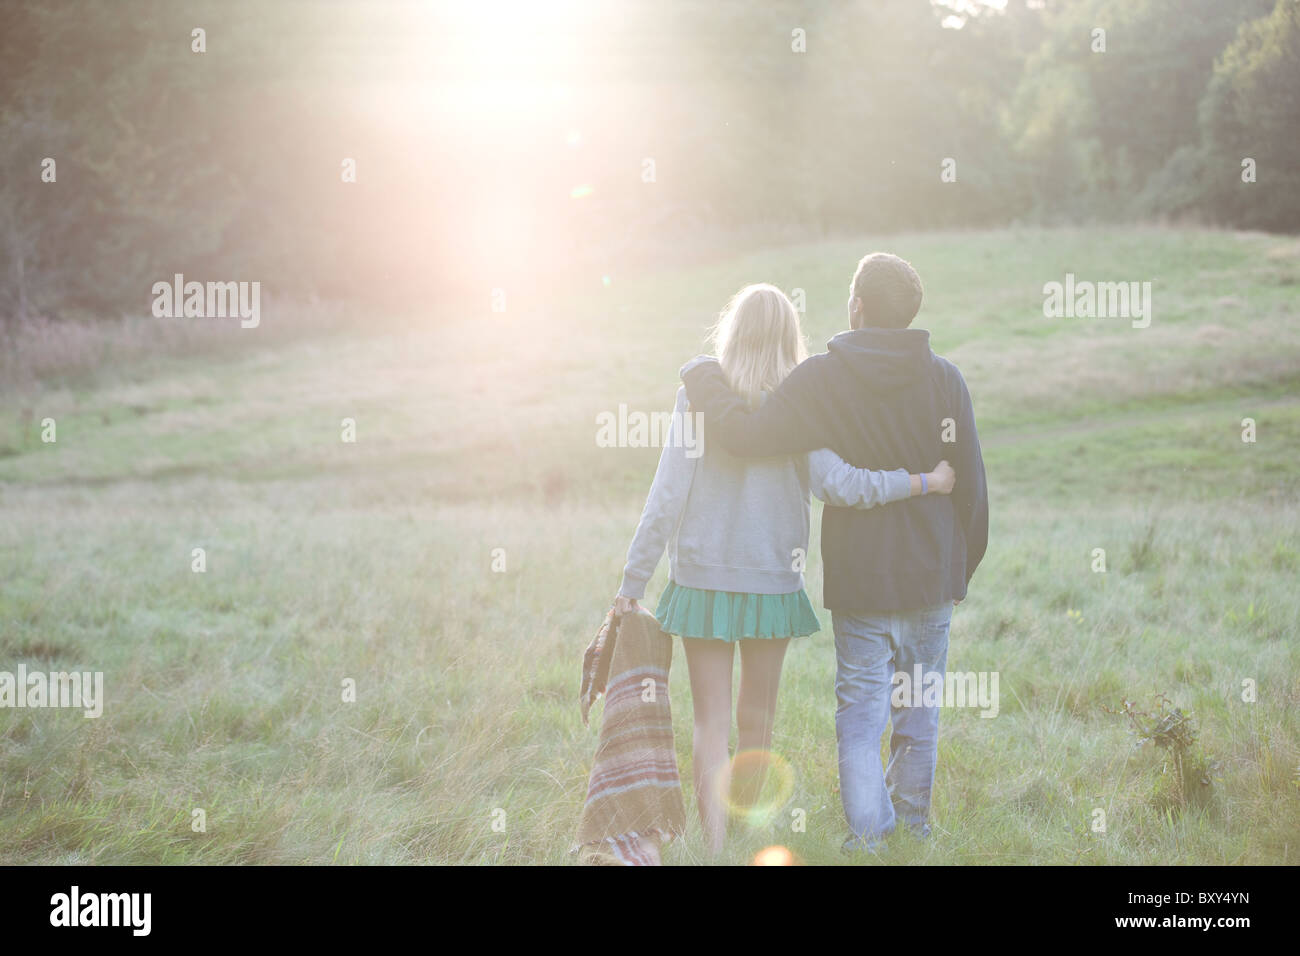 Rear view of a young couple walking in the countryside Stock Photo